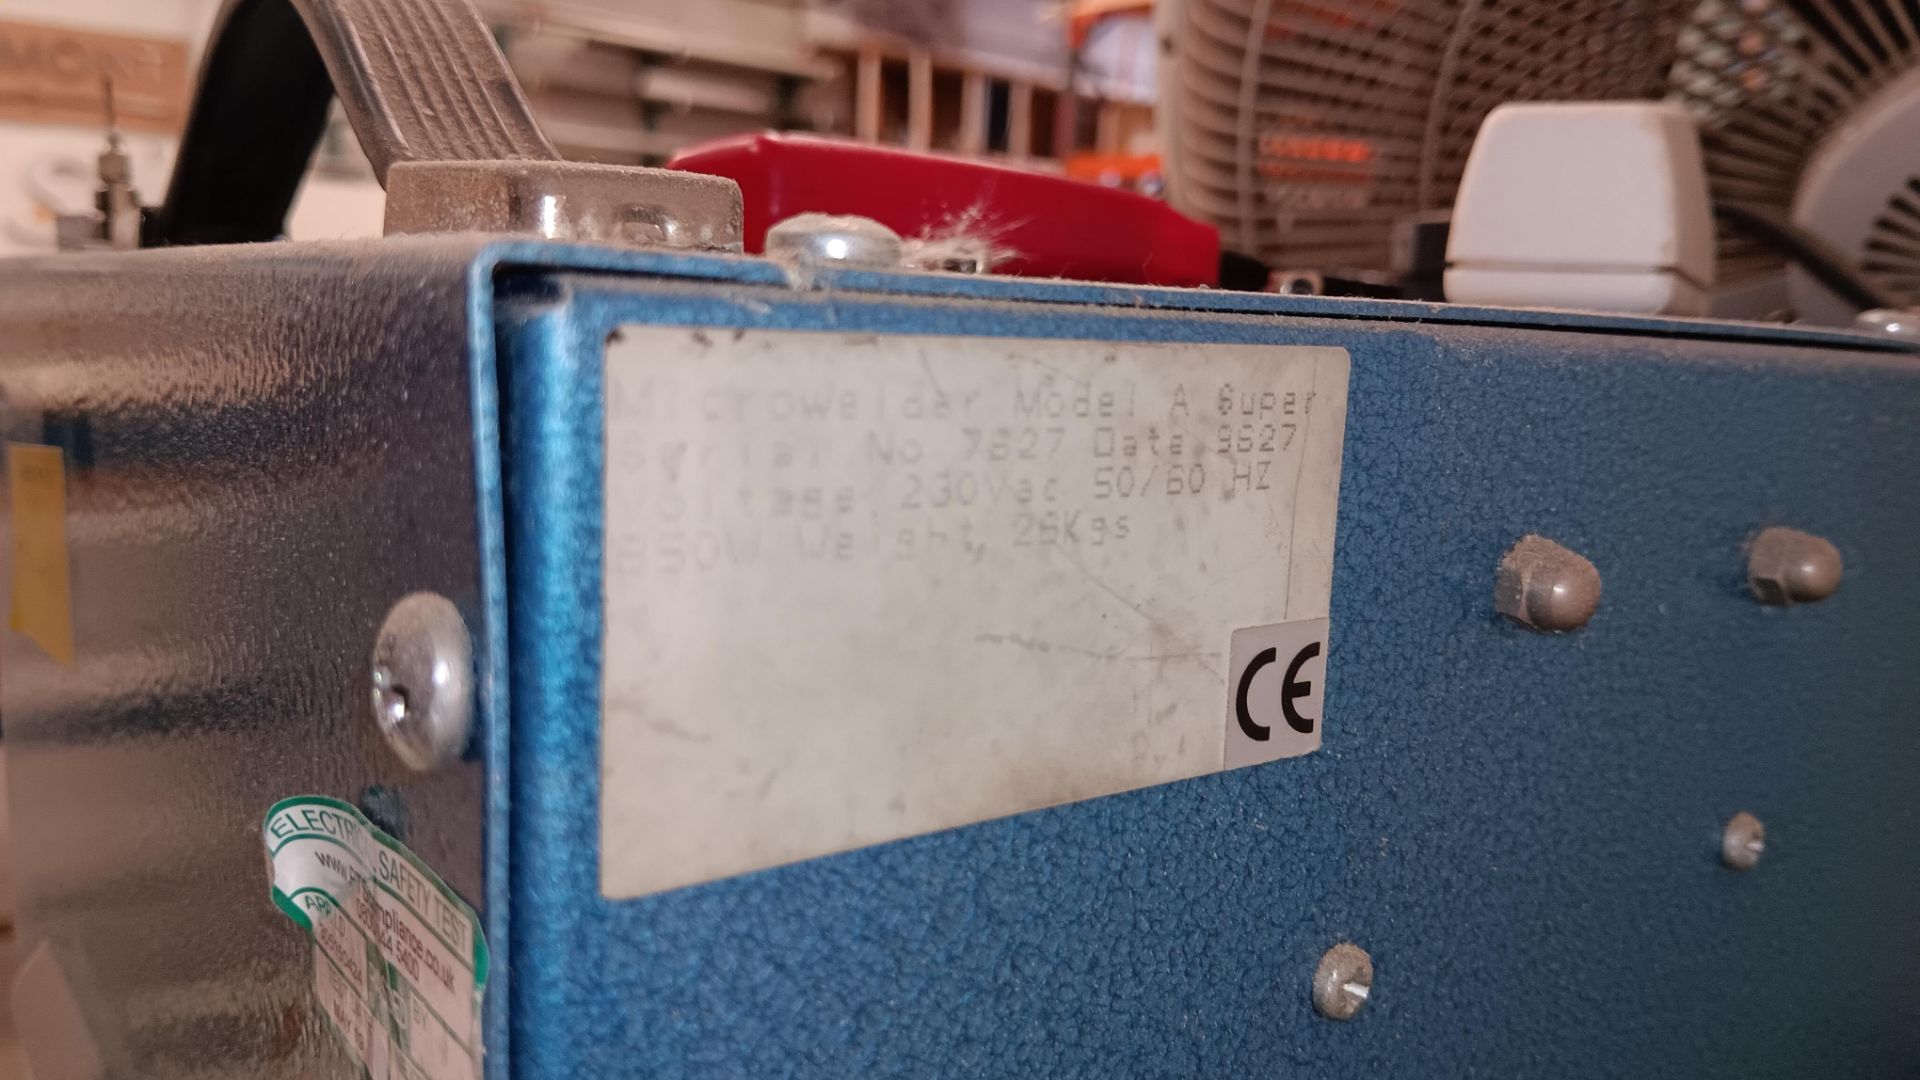 Micro Welder type Super-A, serial number 7627, 240v – Located in Unit 3 - Image 3 of 3